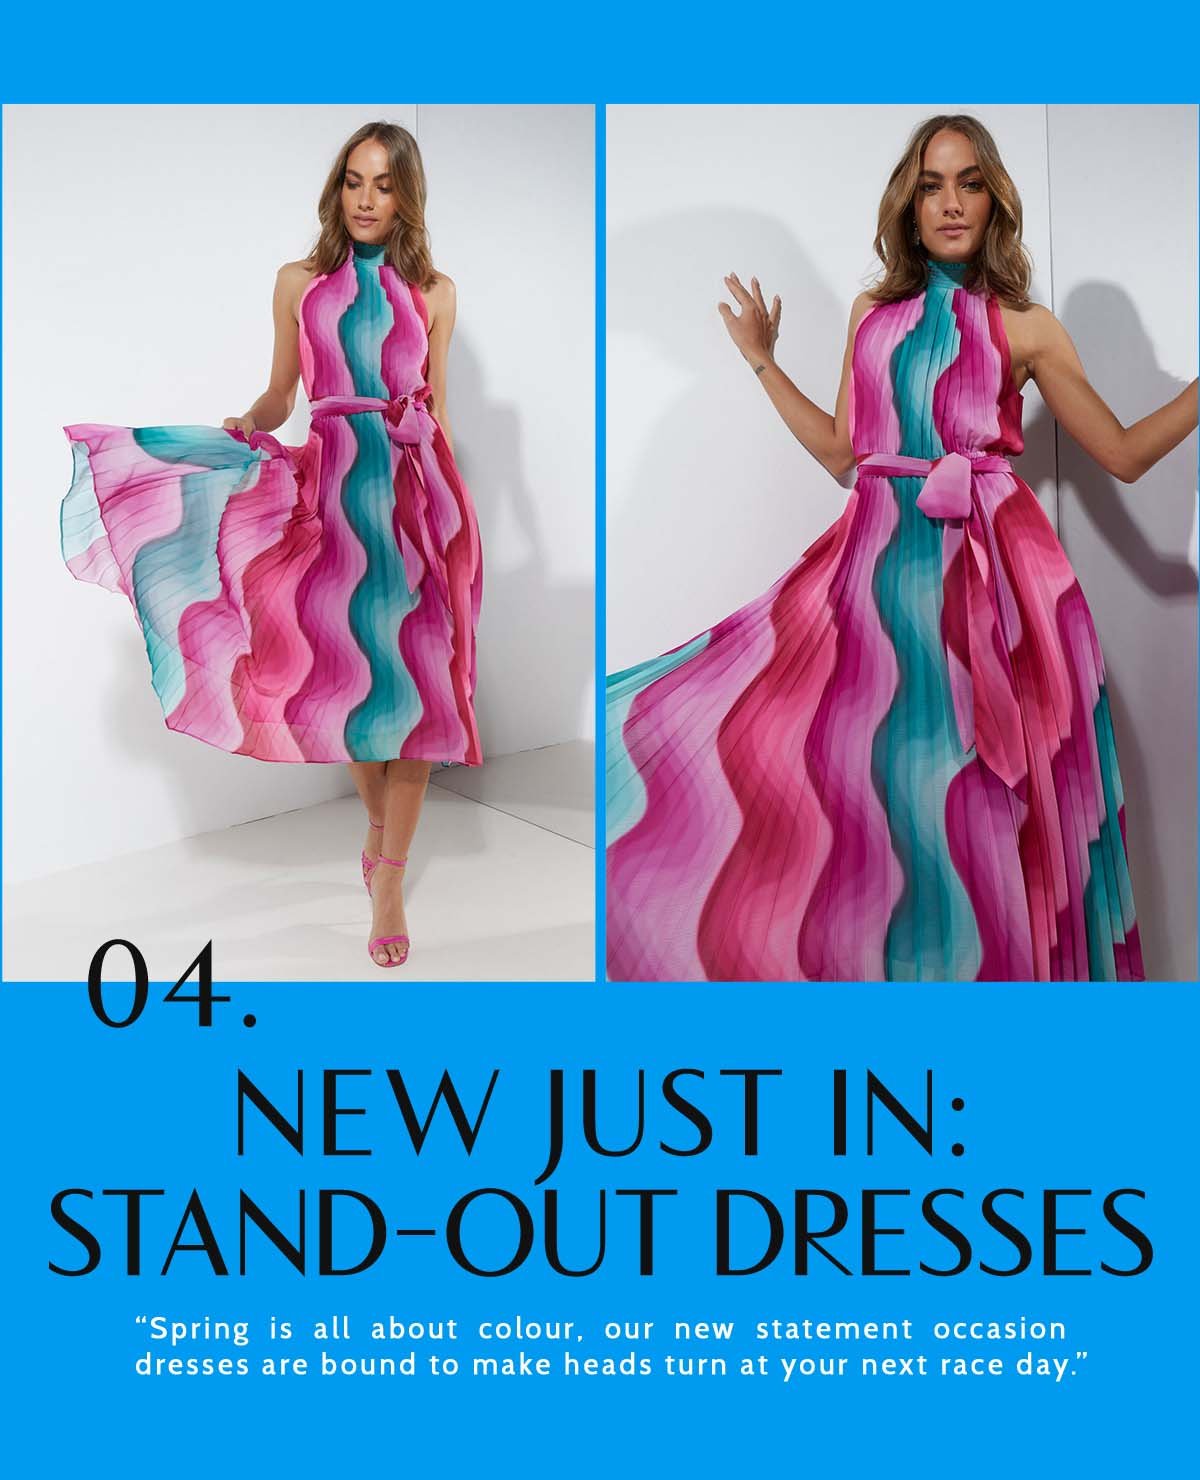 4. New Just In: Stand-Out Dresses. “Spring is all about colour, our new statement occasion dresses are bound to make heads turn at your next race day.” 